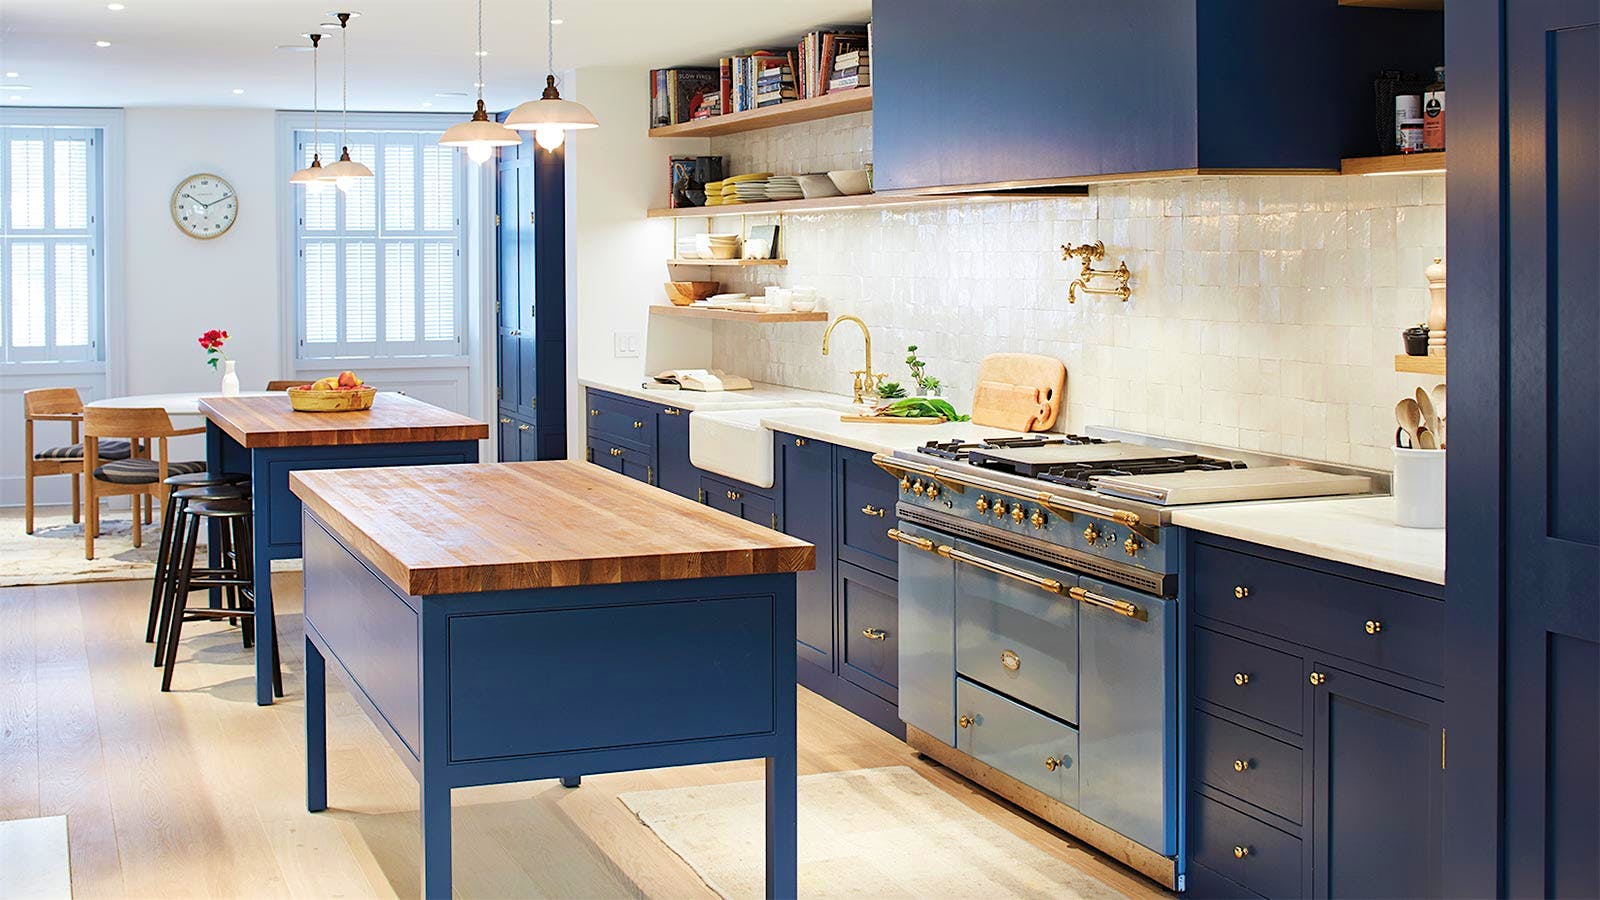 Kitchen with light-reflecting navy-blue walls and light oak floors.